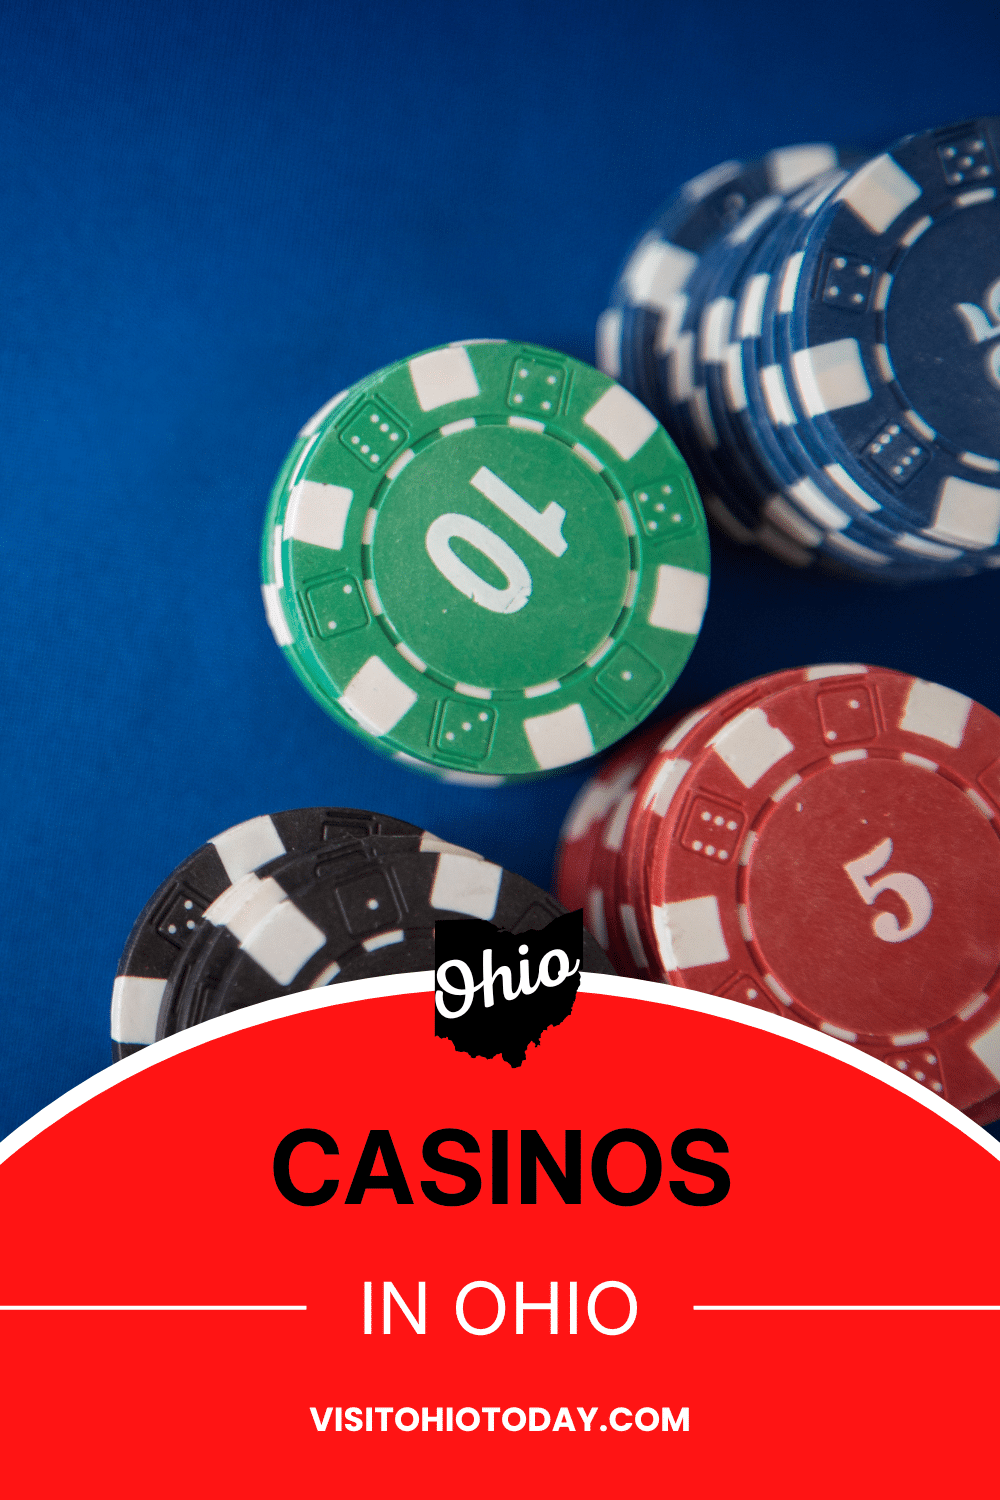 If you are in the mood to have a flutter, then Casinos in Ohio are where it’s at! Ohio offers casinos with a fun variety of games to play! | Casinos In Ohio | Ohio Casinos | Visit Ohio Today